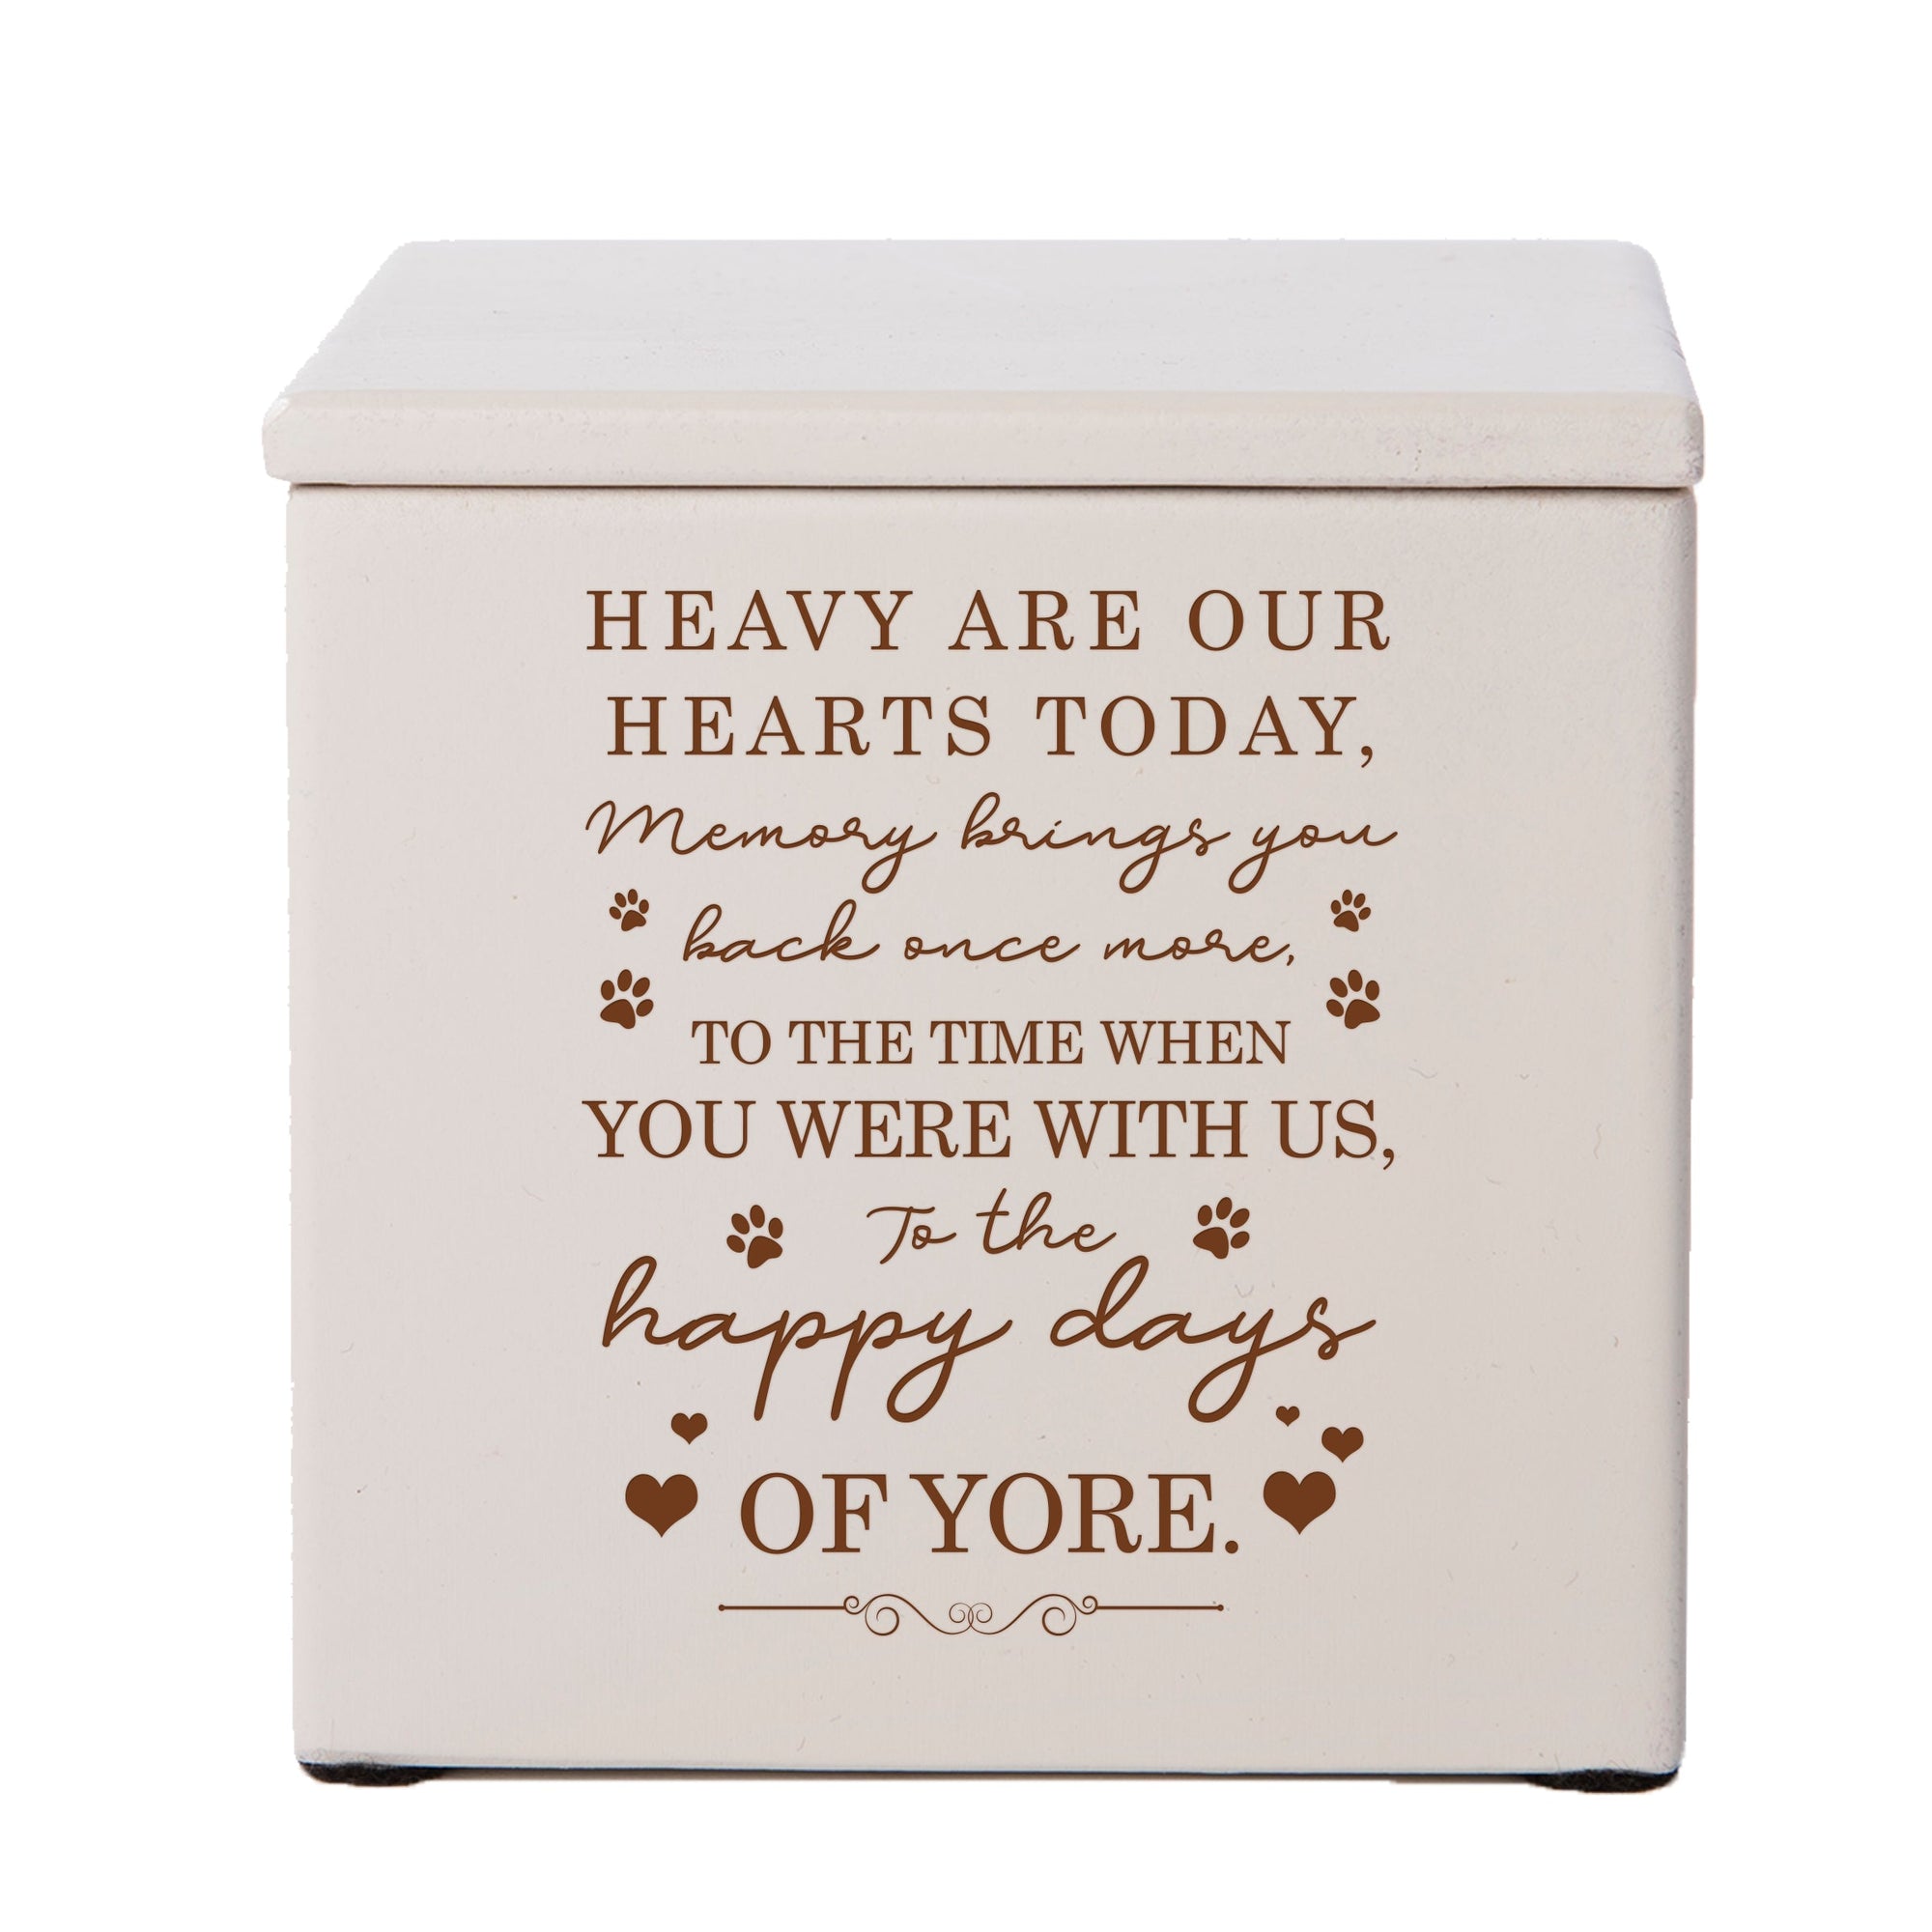 Pet Memorial Keepsake Cremation Urn Box for Dog or Cat - Heavy Are Our Hearts Today